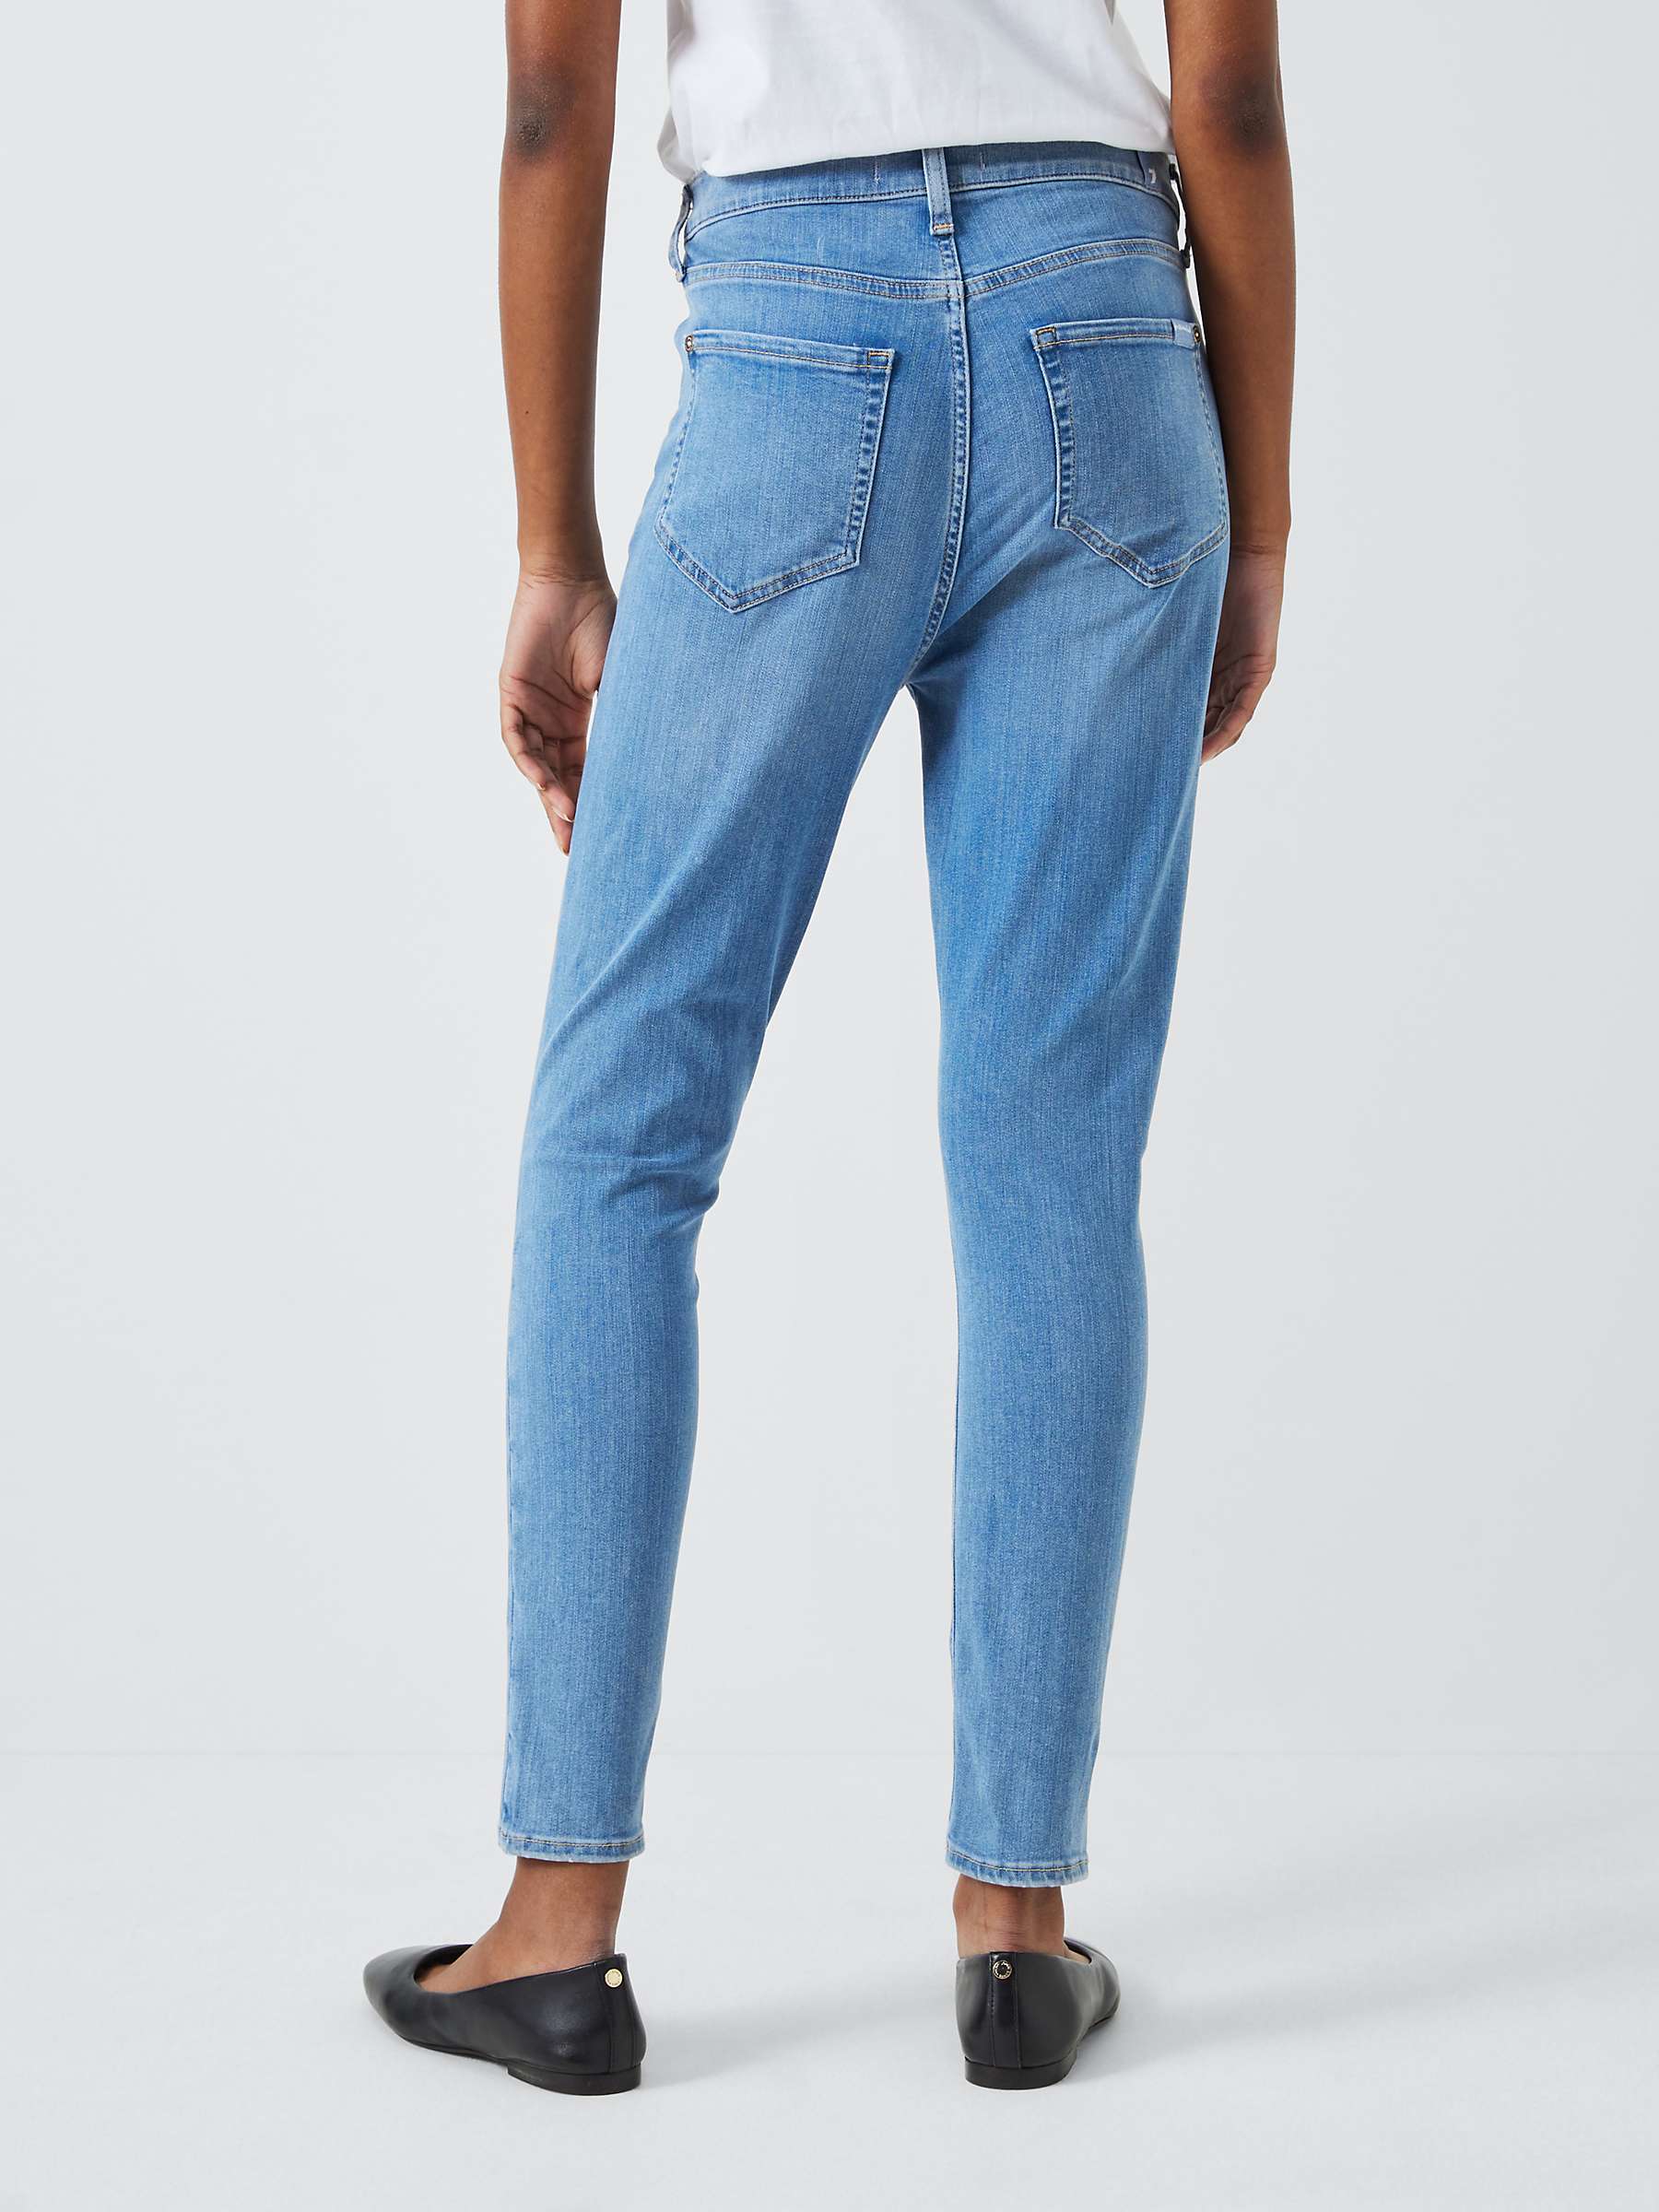 Buy 7 For All Mankind Slim Illusion Luxe Salute Skinny Ankle Jeans, Light Blue Online at johnlewis.com